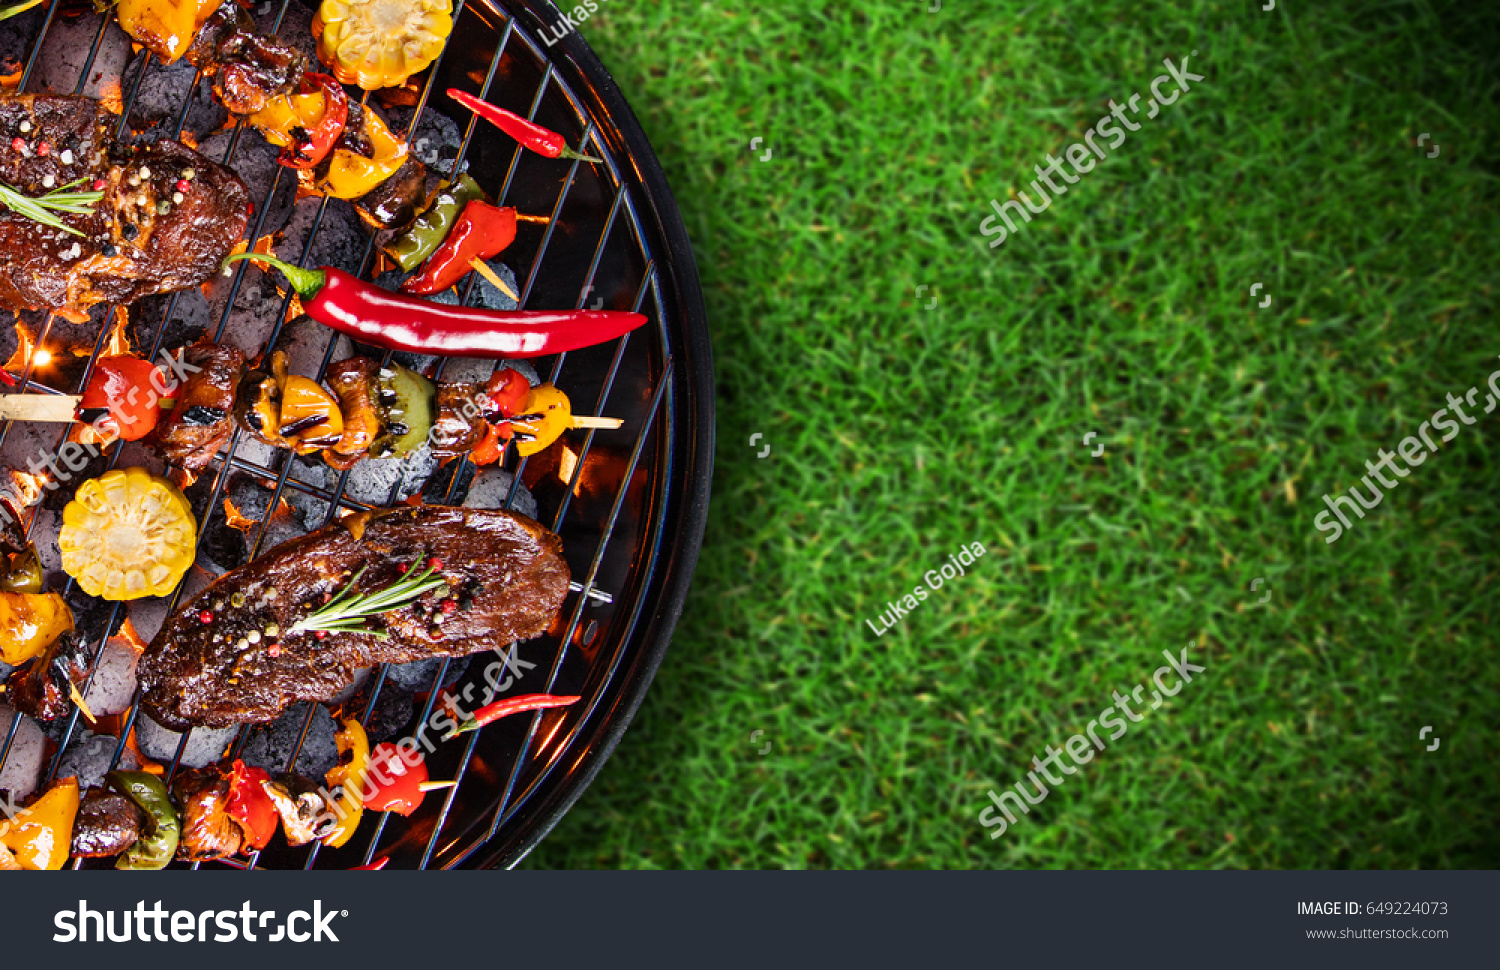 Barbecue garden grill with beef steaks, close-up. #649224073